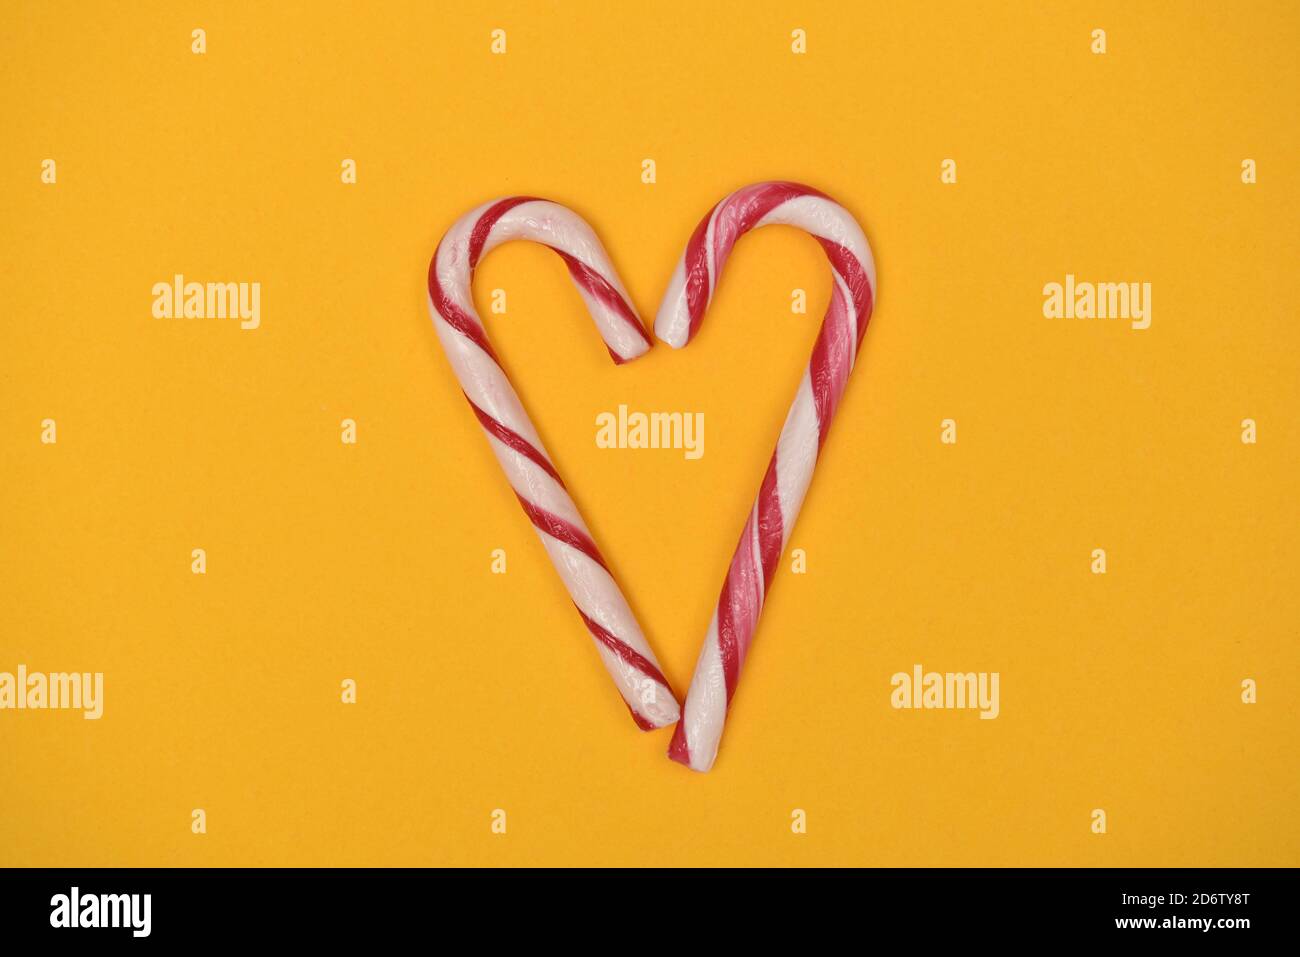 Candy canes shaped as a heart on a yellow background Stock Photo